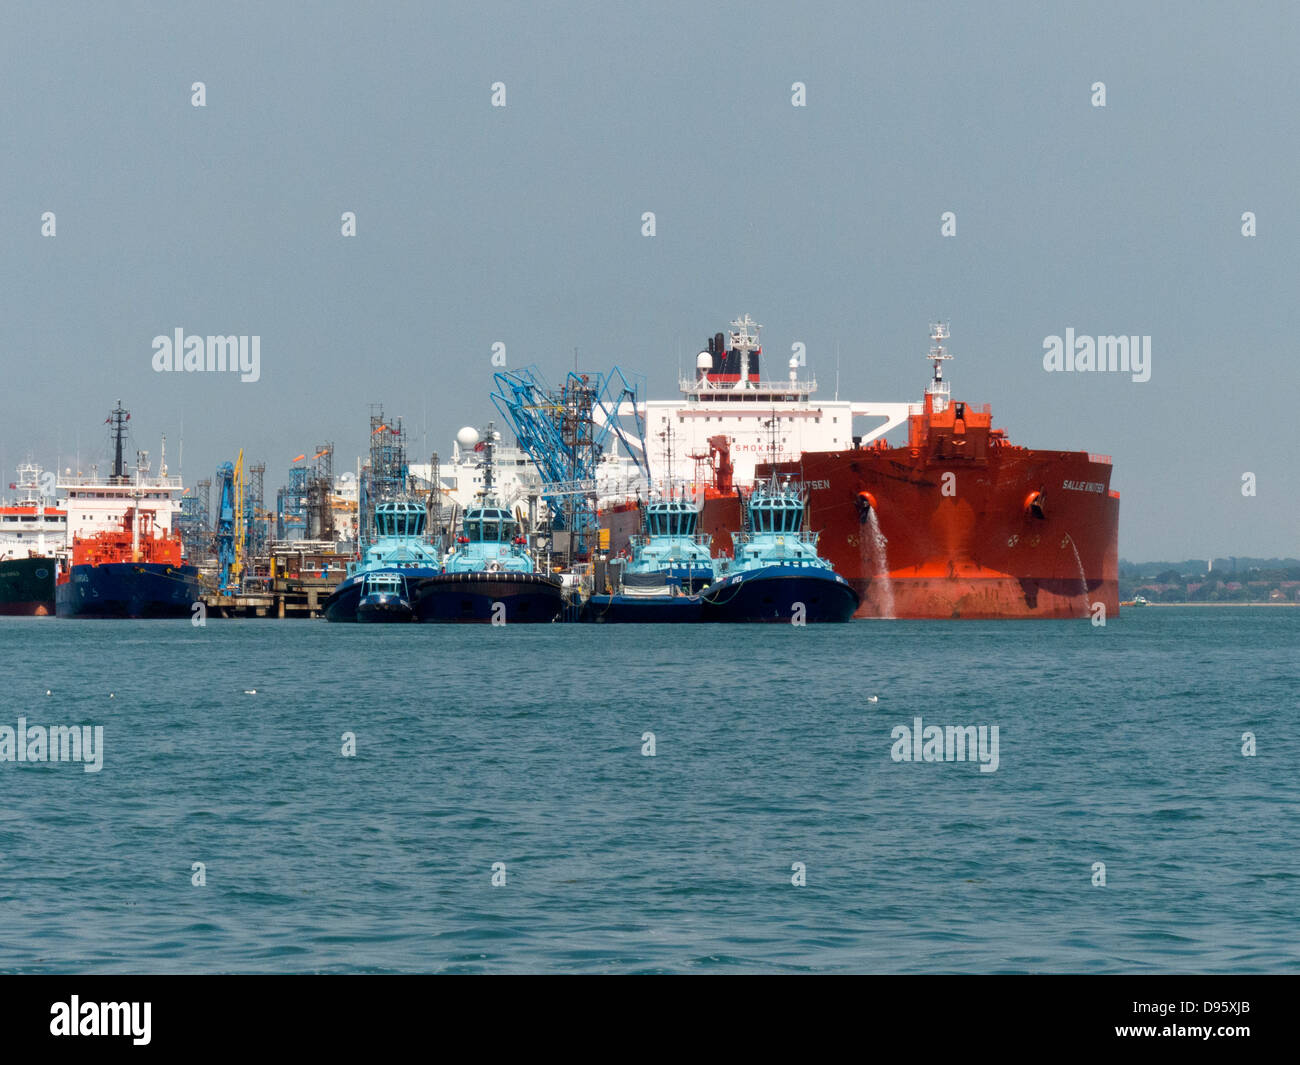 Fawley Oil Refinery Tanker Jetty for Unloading supertankers cargo crude oil via Tug tugboat Stock Photo